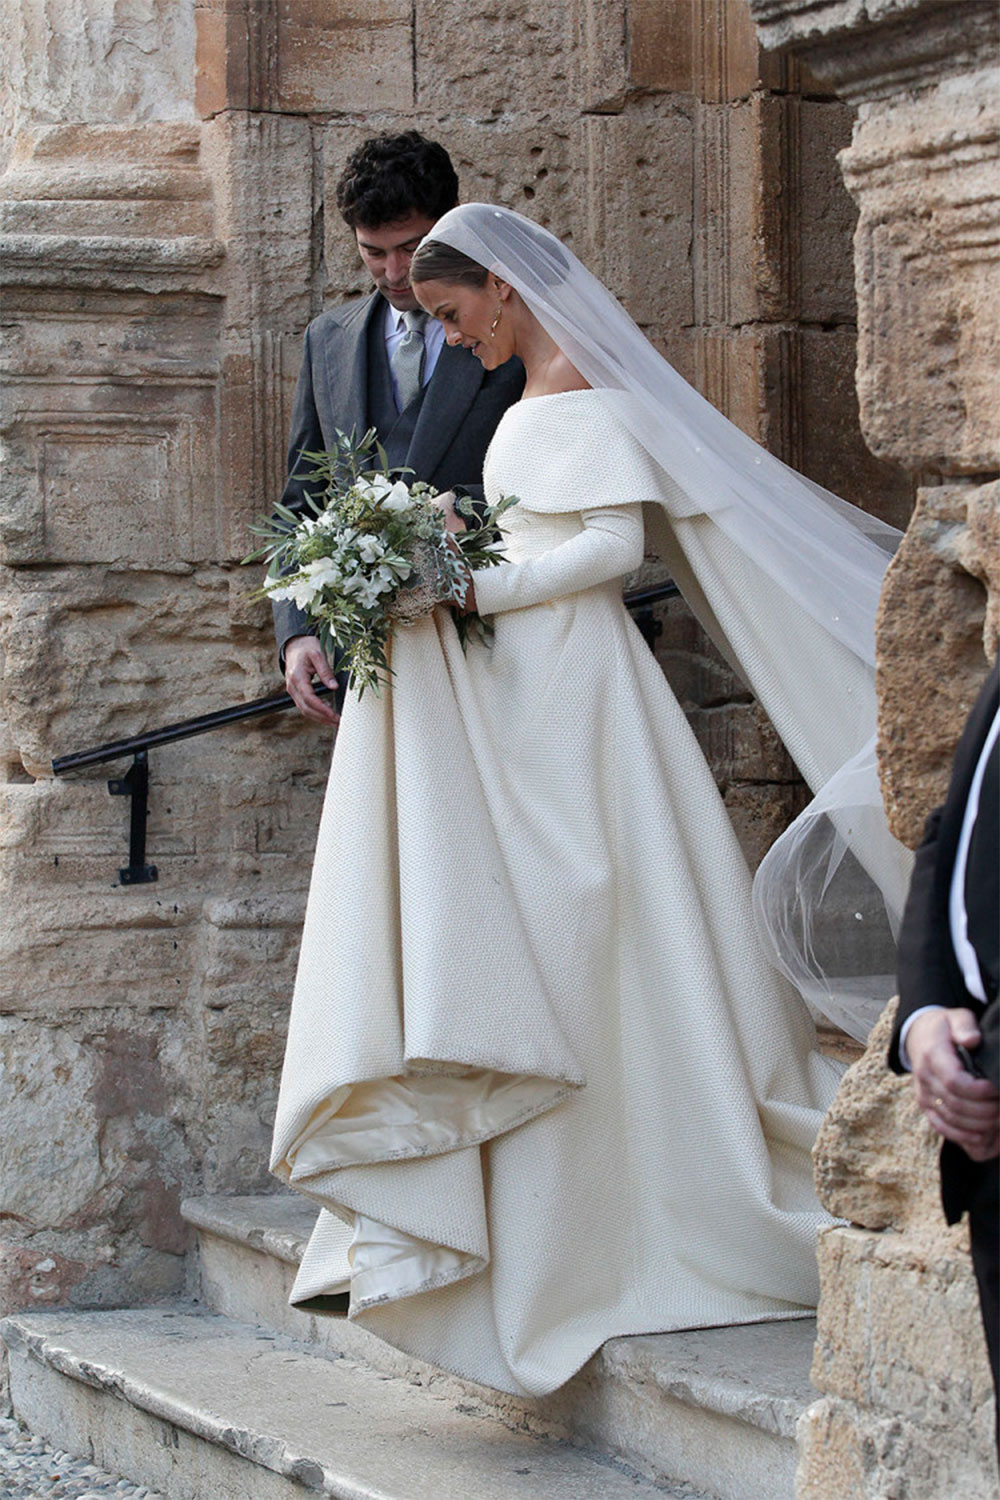 The gorgeous cream off-the-shoulder gown with veil proved an elegant choice, despite the initial tussle in the wind upon arriving at the church.